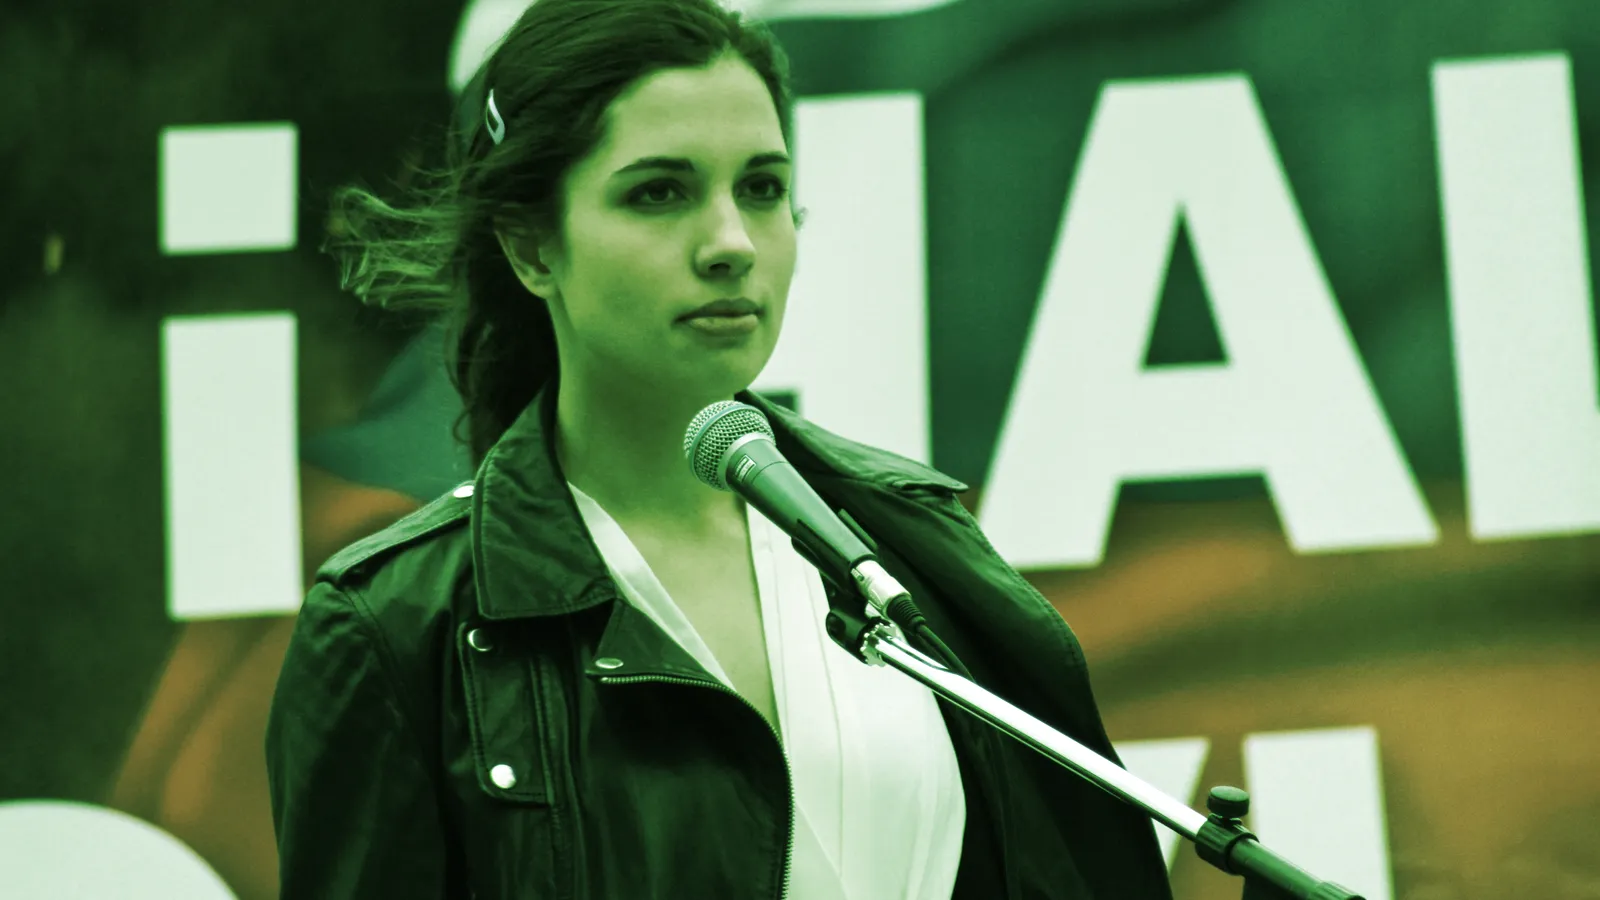 Nadya Tolokonnikova (Pussy Riot) during a 2014 Peace march in support of Ukraine. Image: Shutterstock